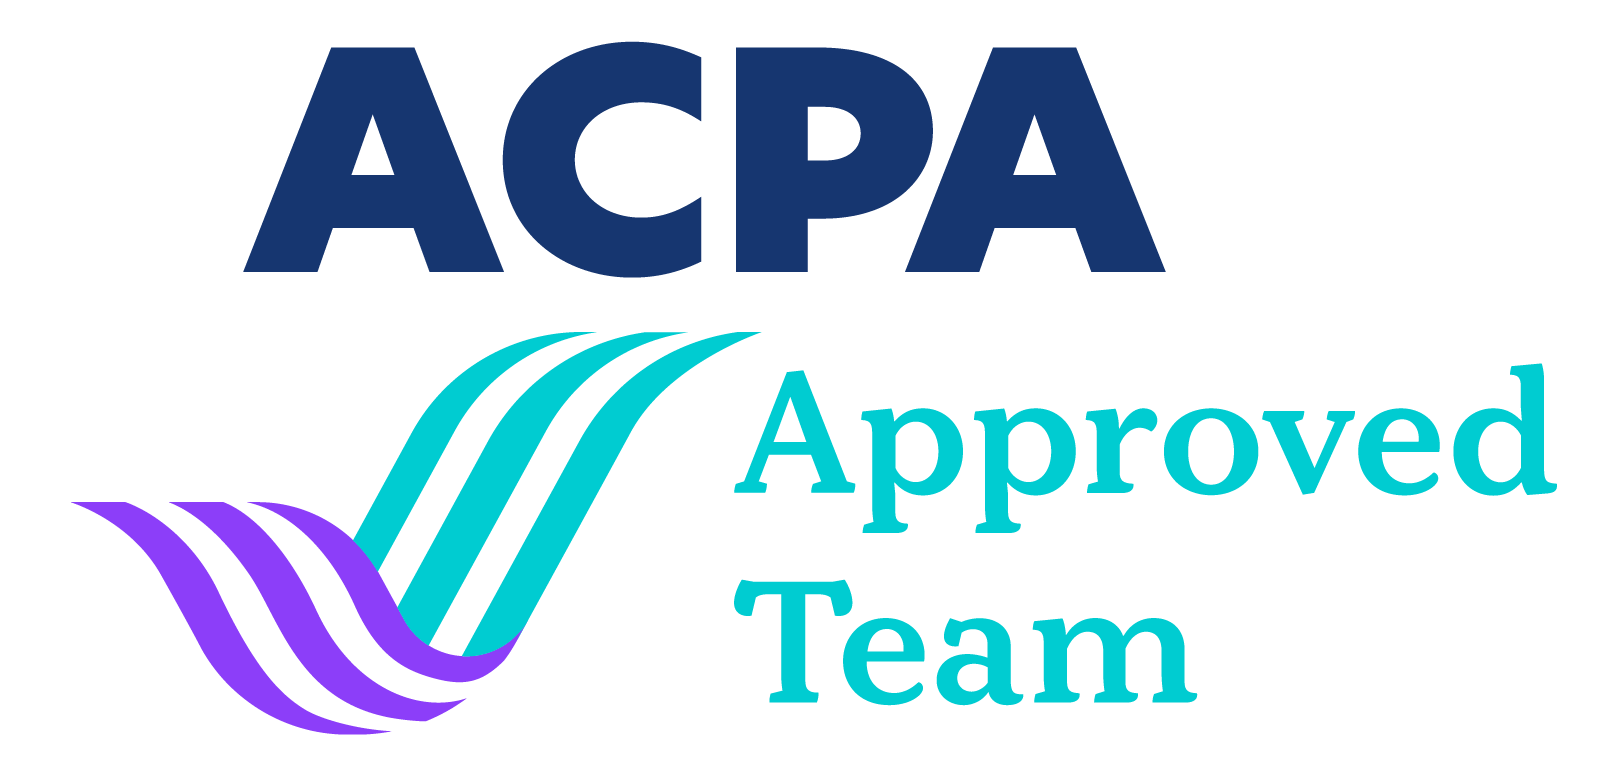 accreditation badge for ACPA Approved Team